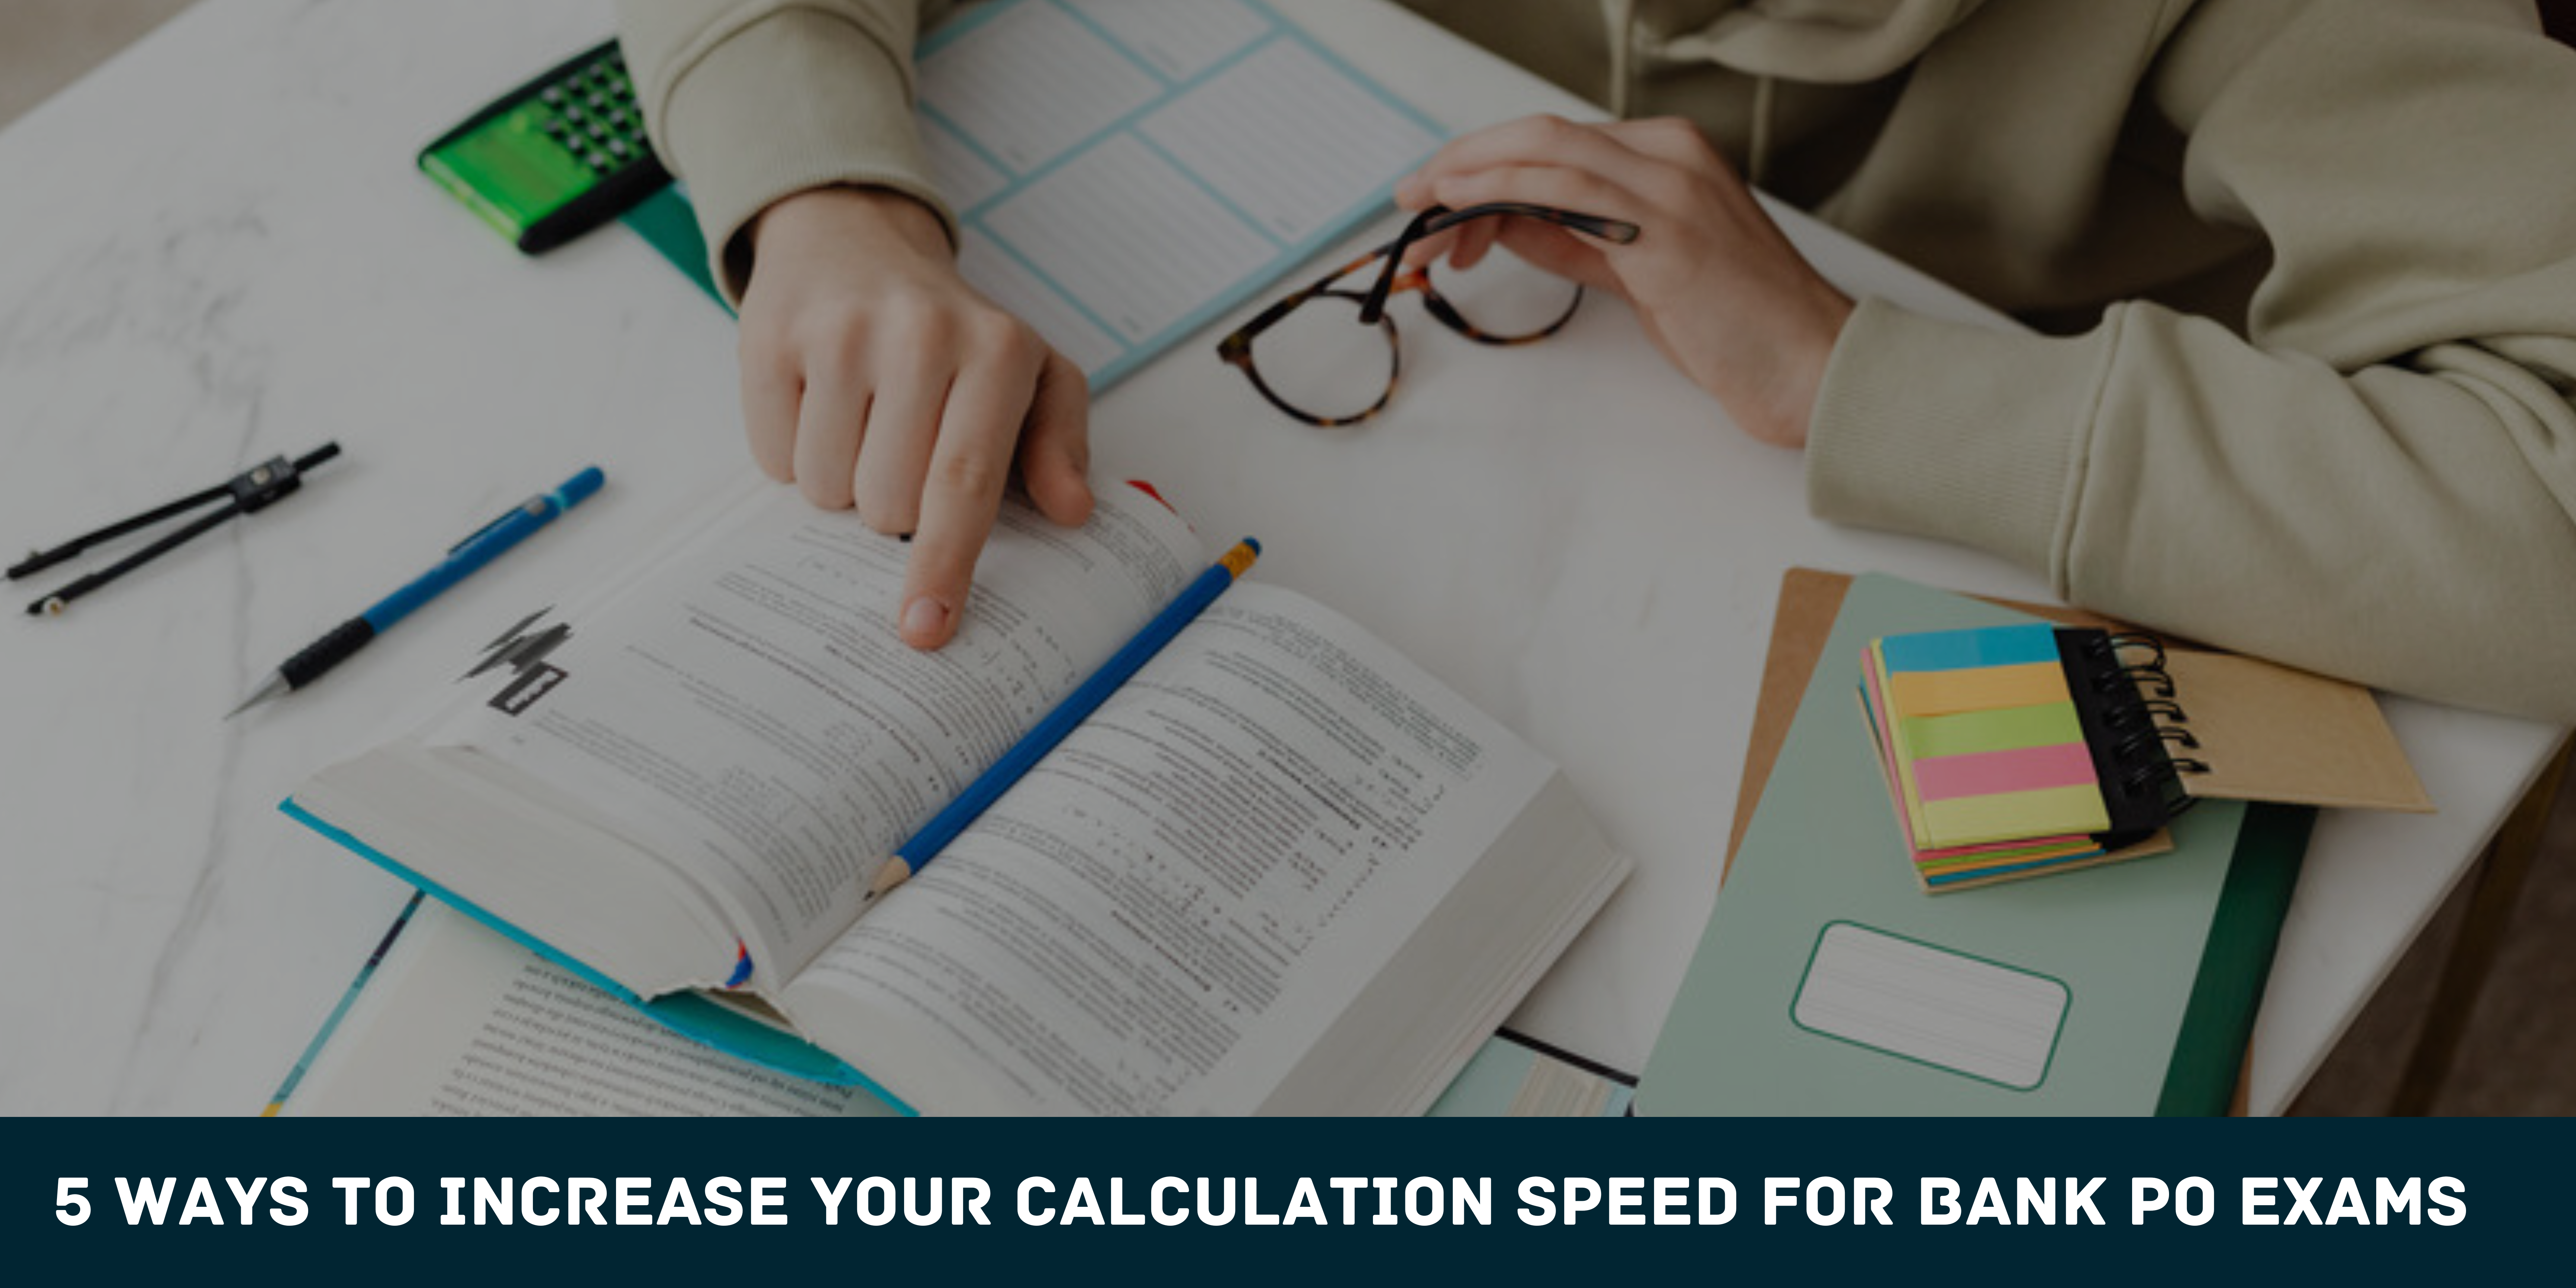 5 ways to increase your calculation speed for Bank PO exams